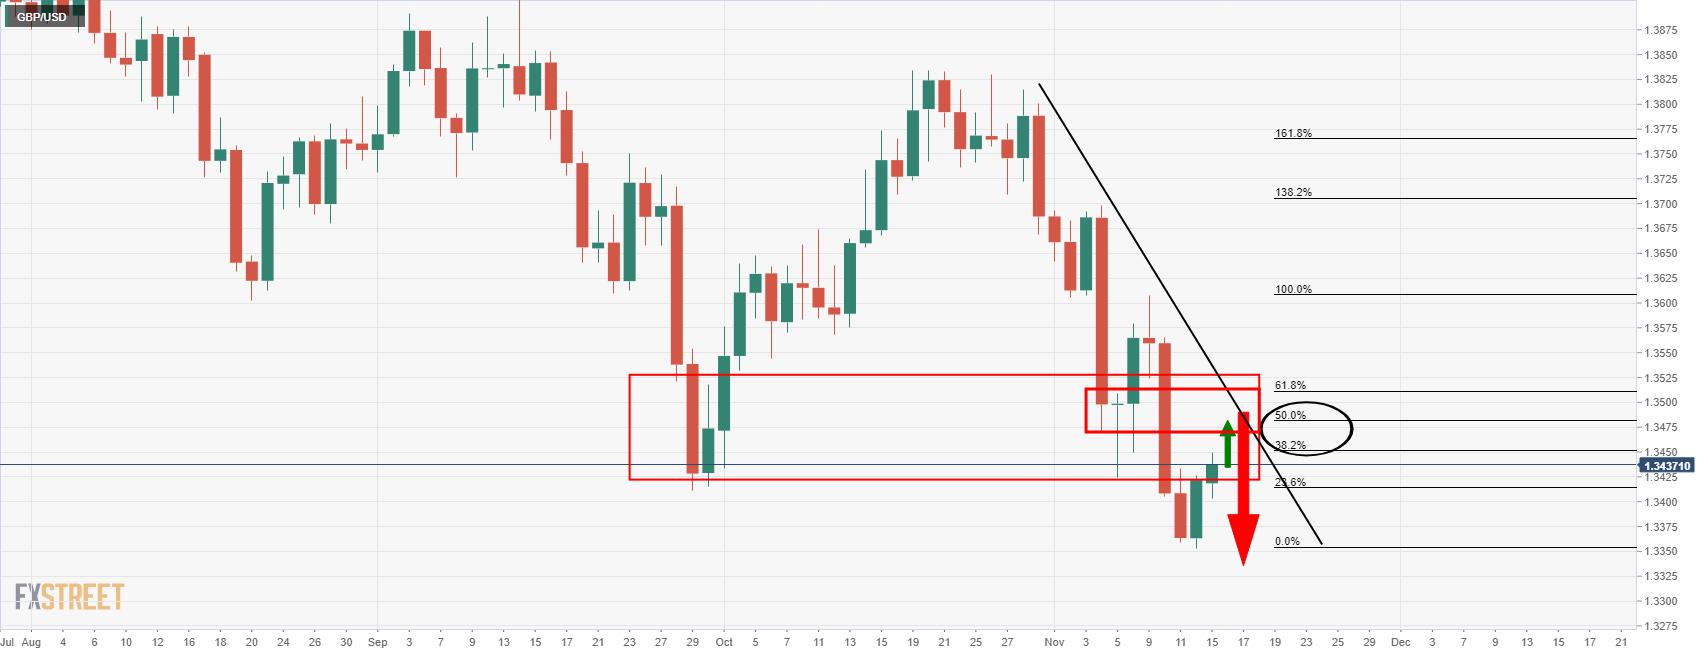 GBP/USD bulls fail first attempt to break 1.3450 critical round number